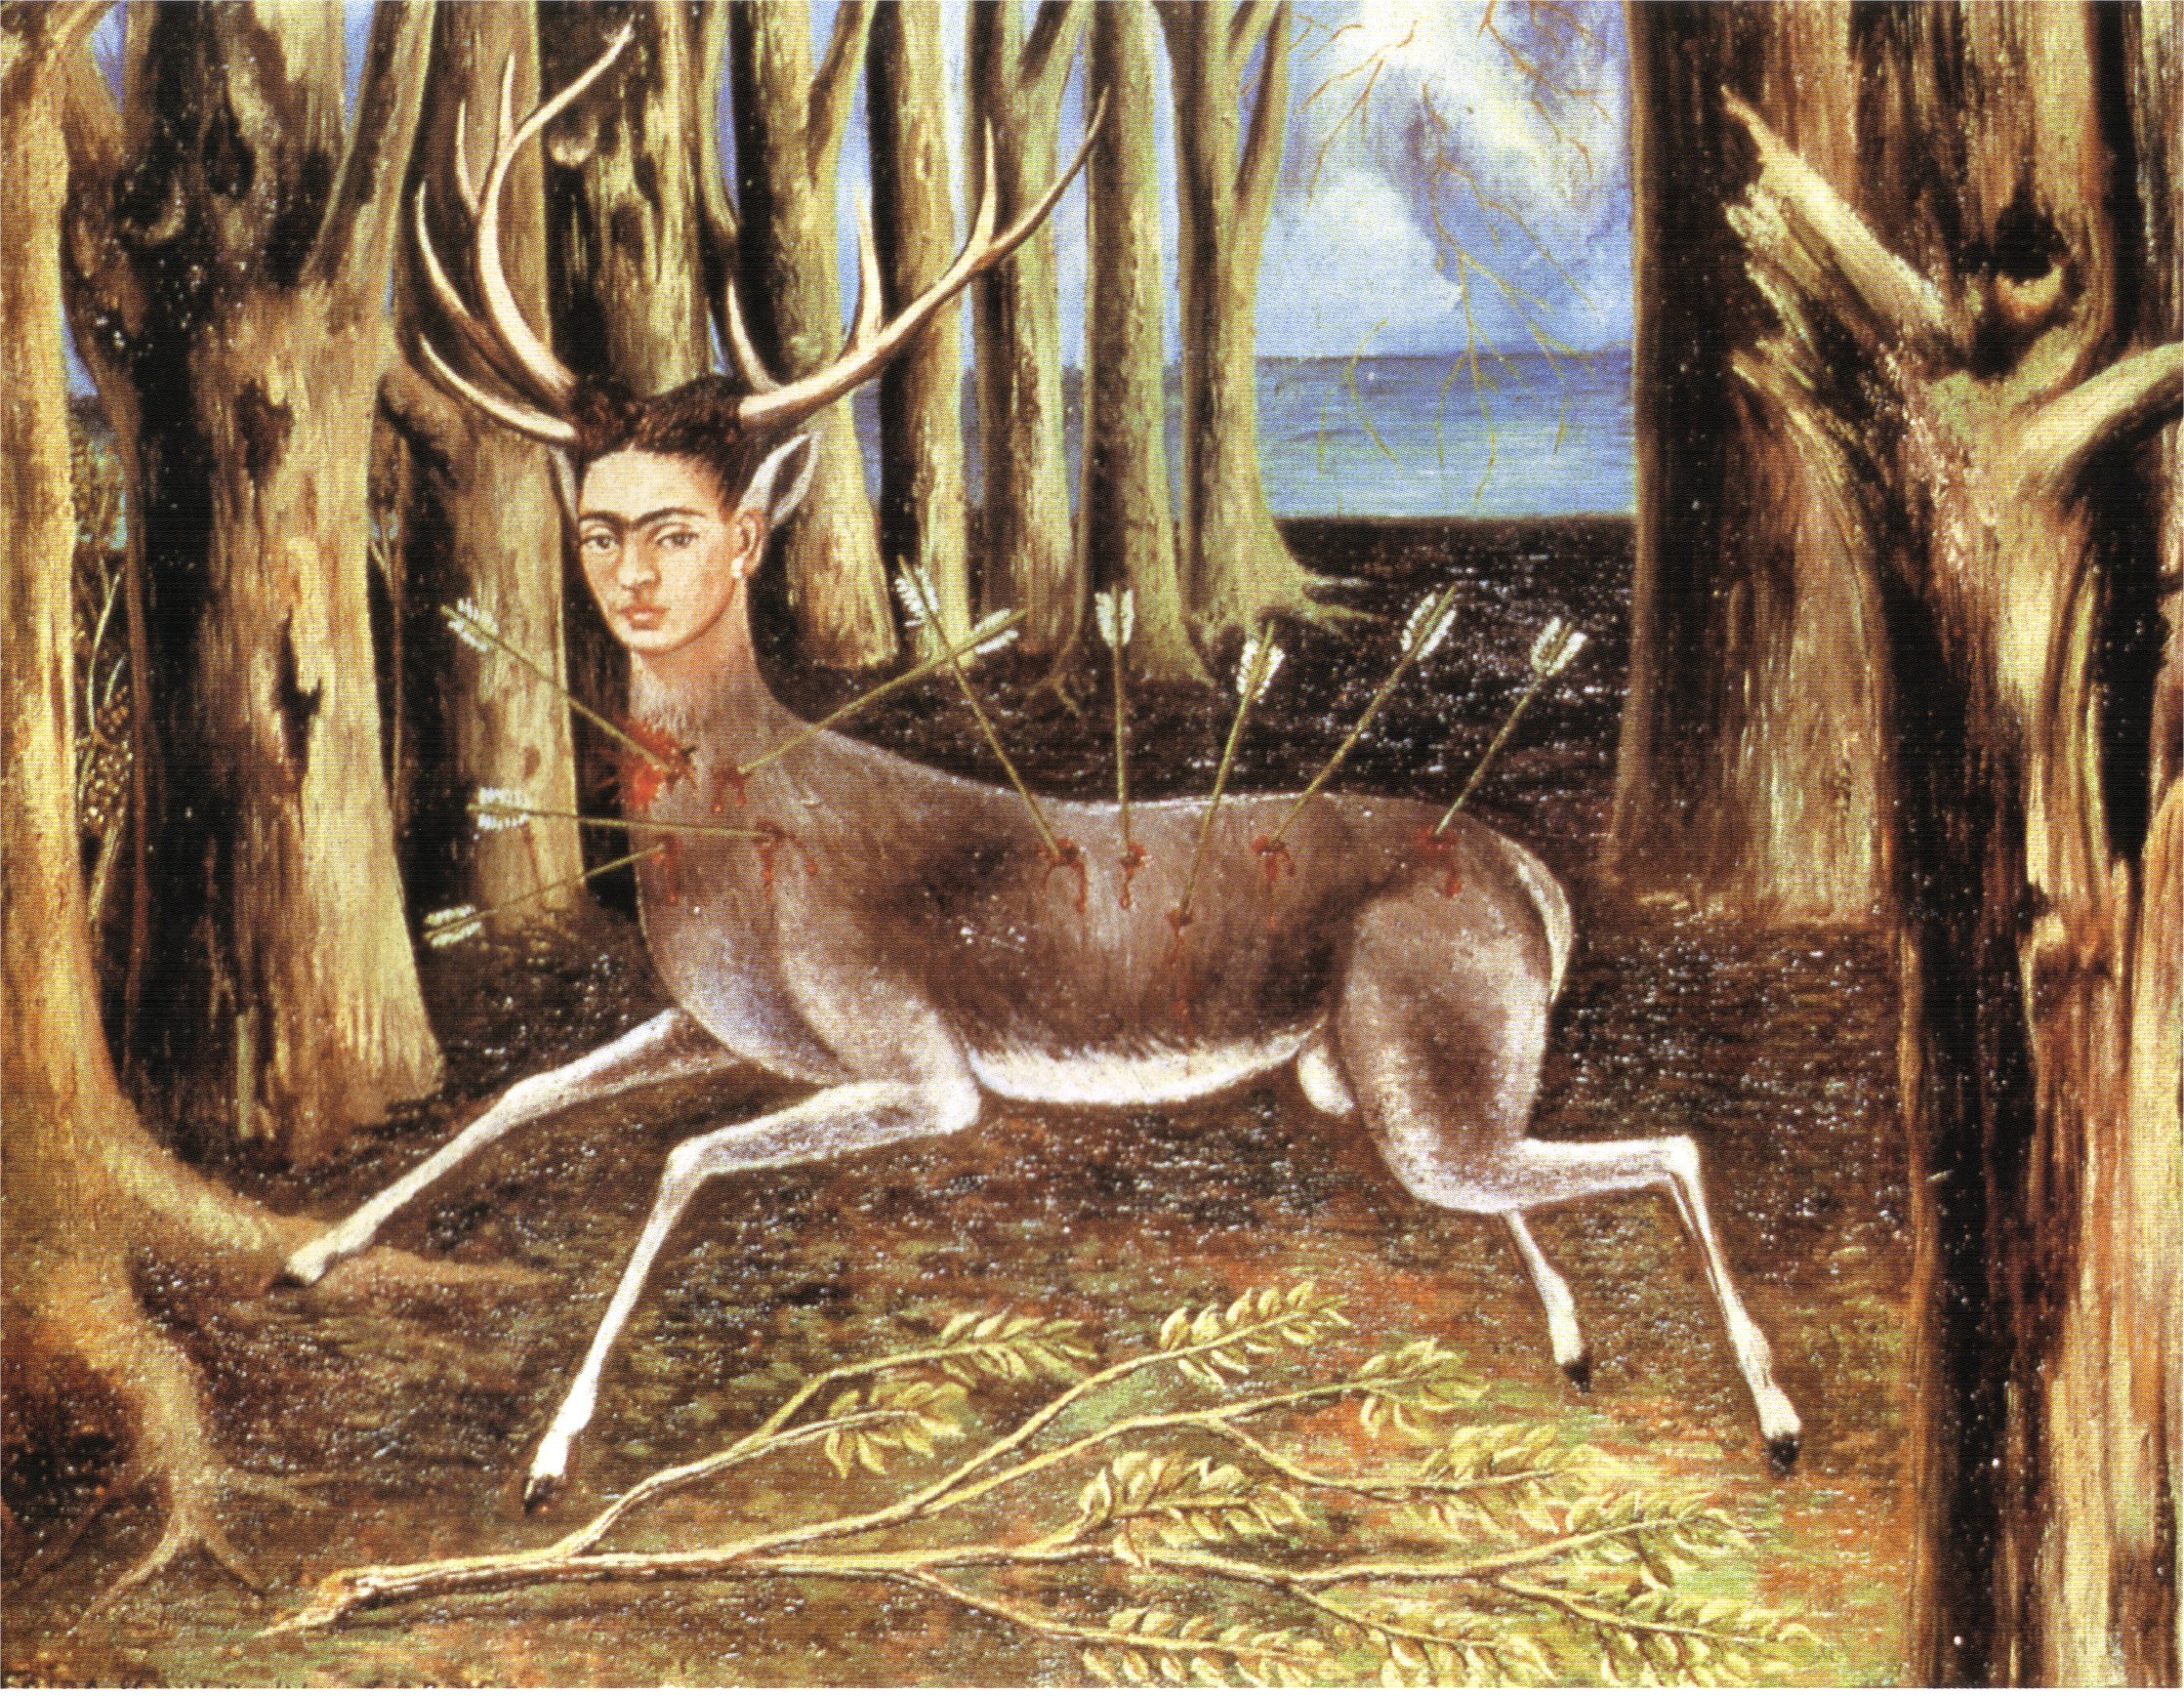 The Wounded Deer (1946).